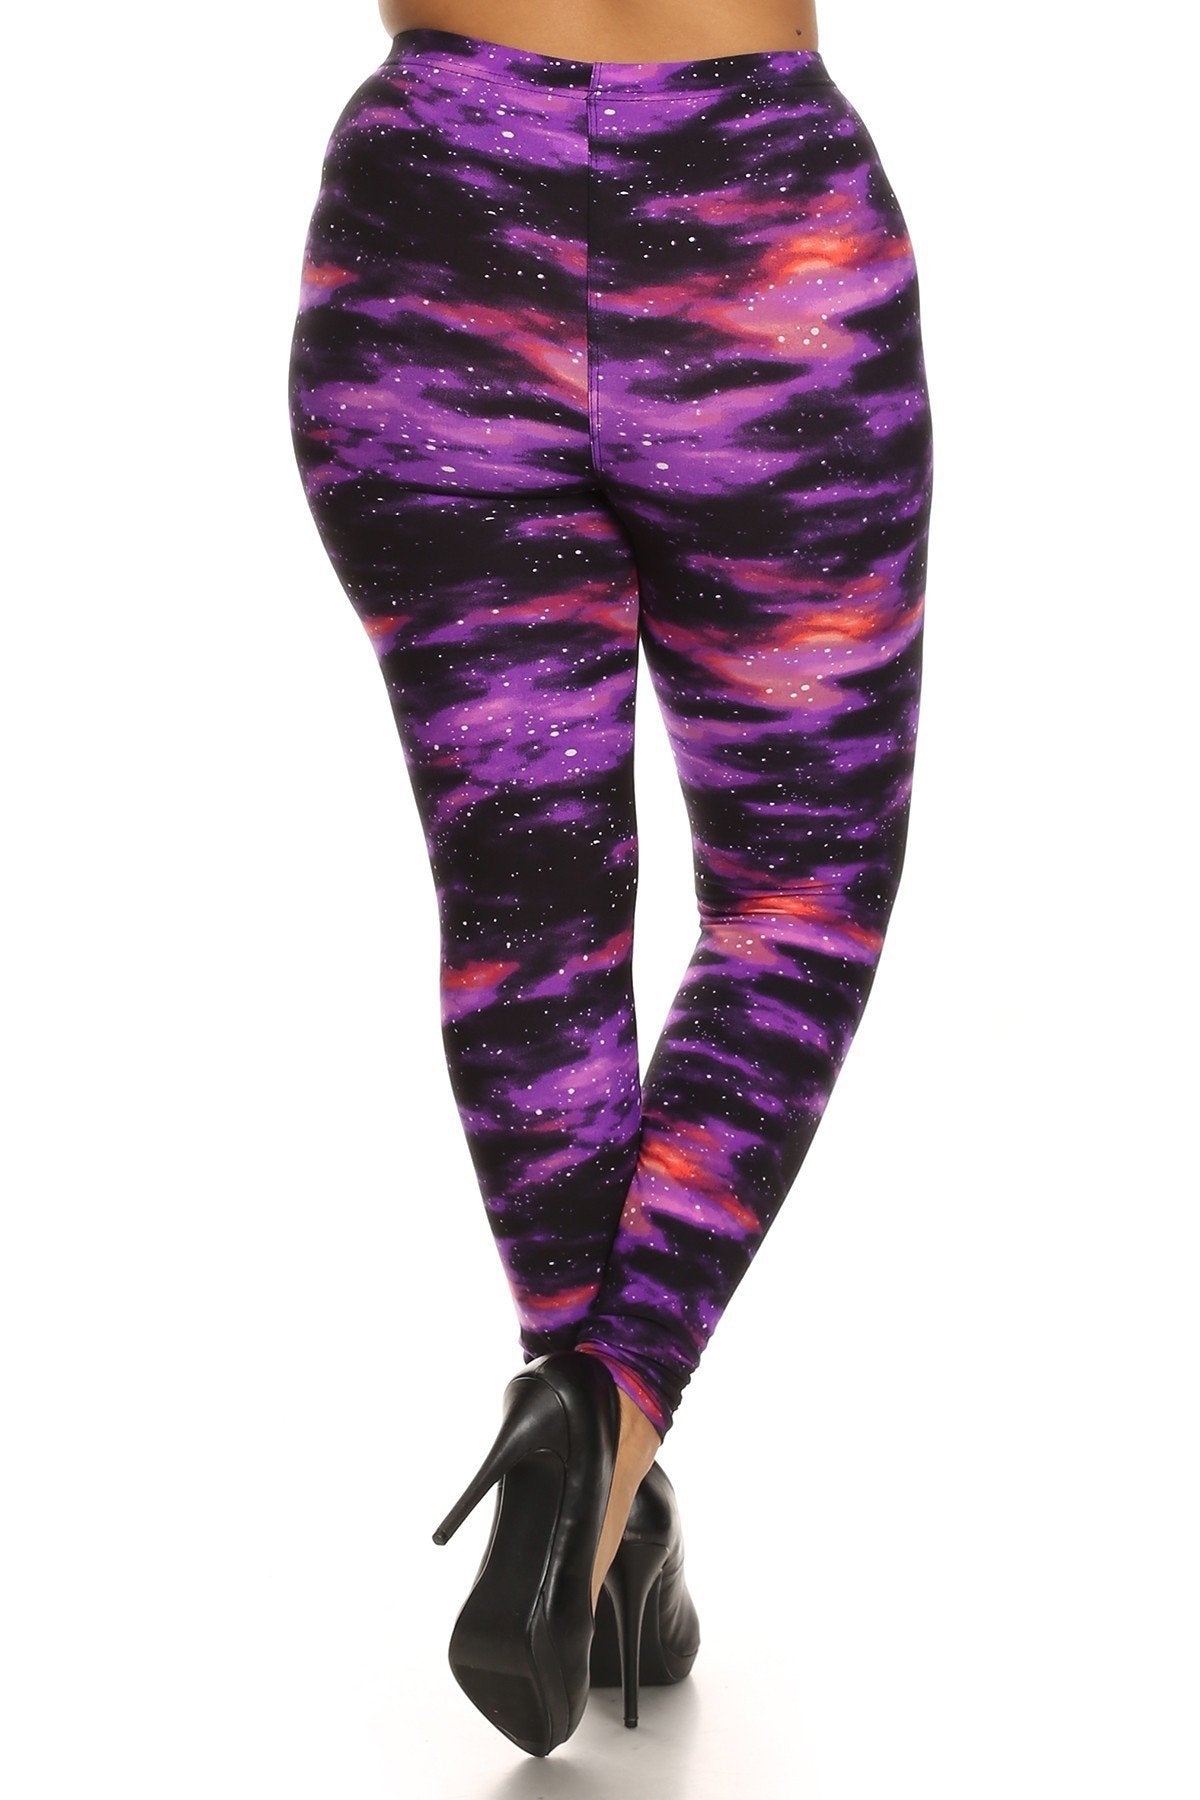 Plus Size Super Soft Peach Skin Fabric, Galaxy Graphic Printed Knit Legging With Elastic Waist Detail. High Waist Fit-[Adult]-[Female]-Multi-Blue Zone Planet